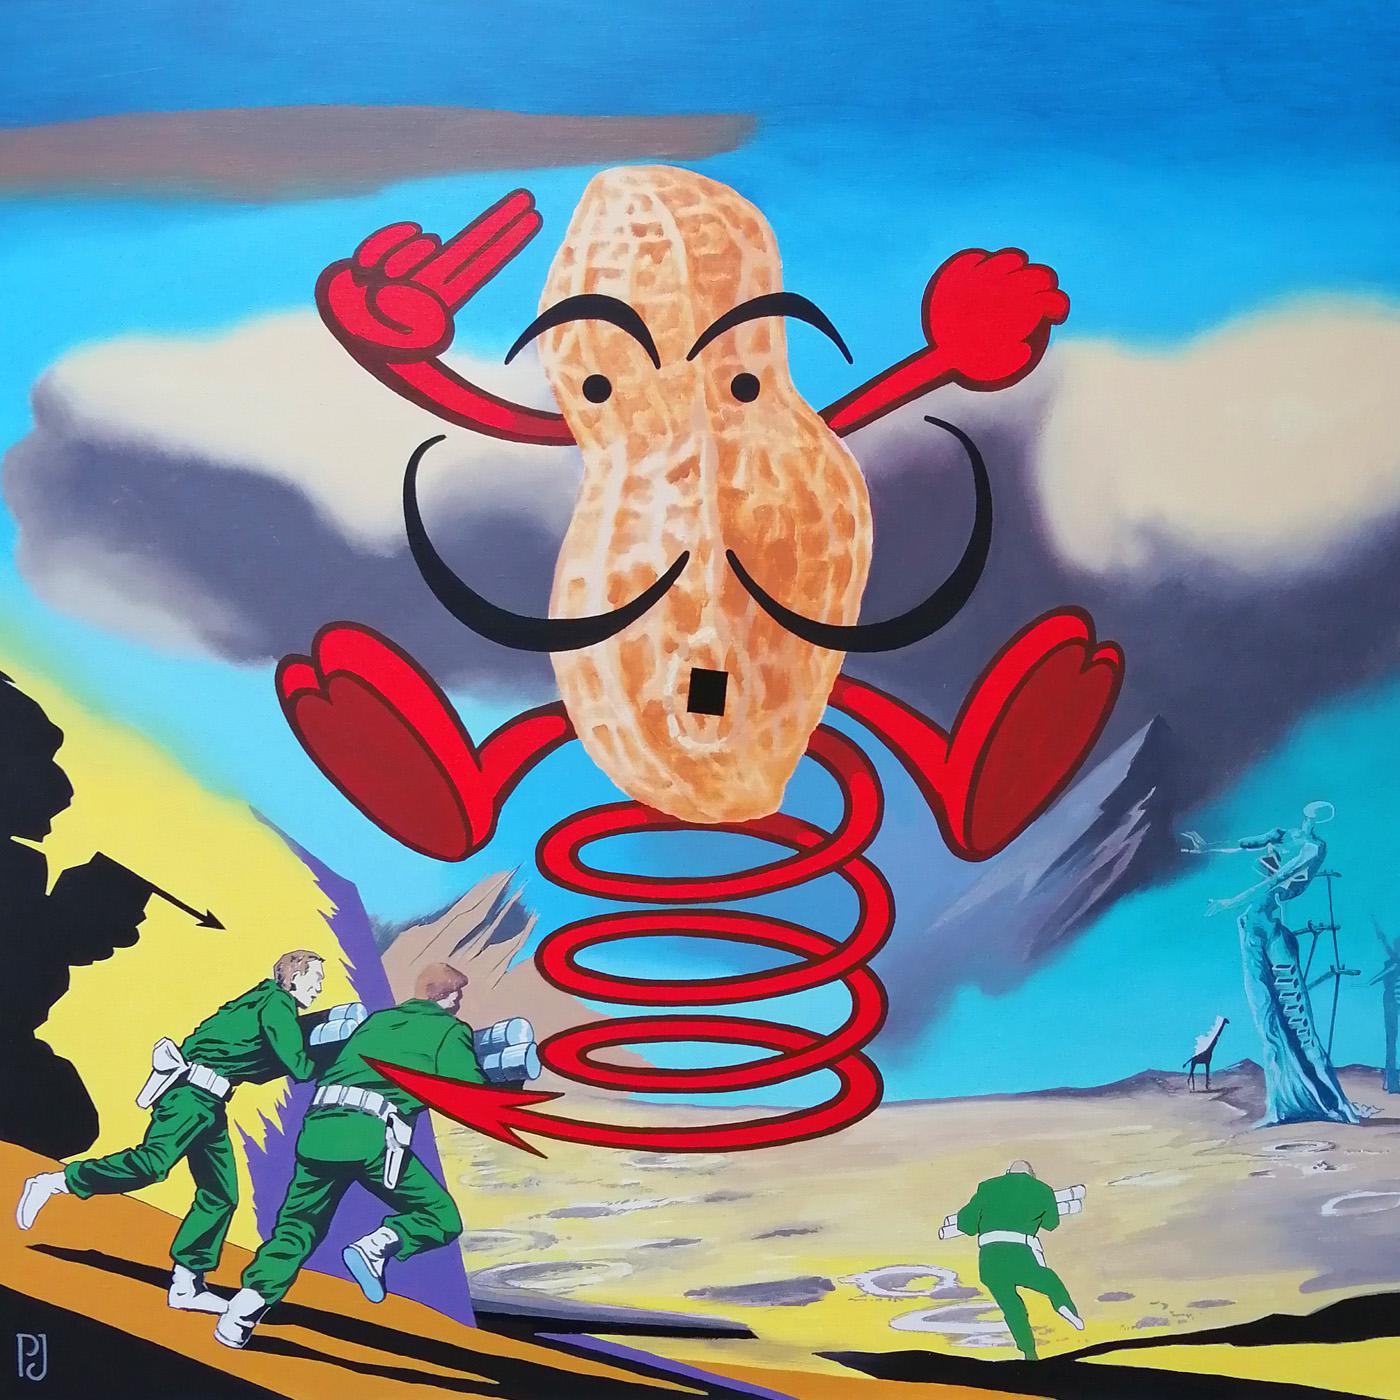 Technical Description : Acrylic painting on canvas

Dimensions : 100 x 100 cm

A leaping, grotesque character occupies the space. Around, everything is confused: lunar ground, green soldiers in white sneakers and without helmets. They seem to be